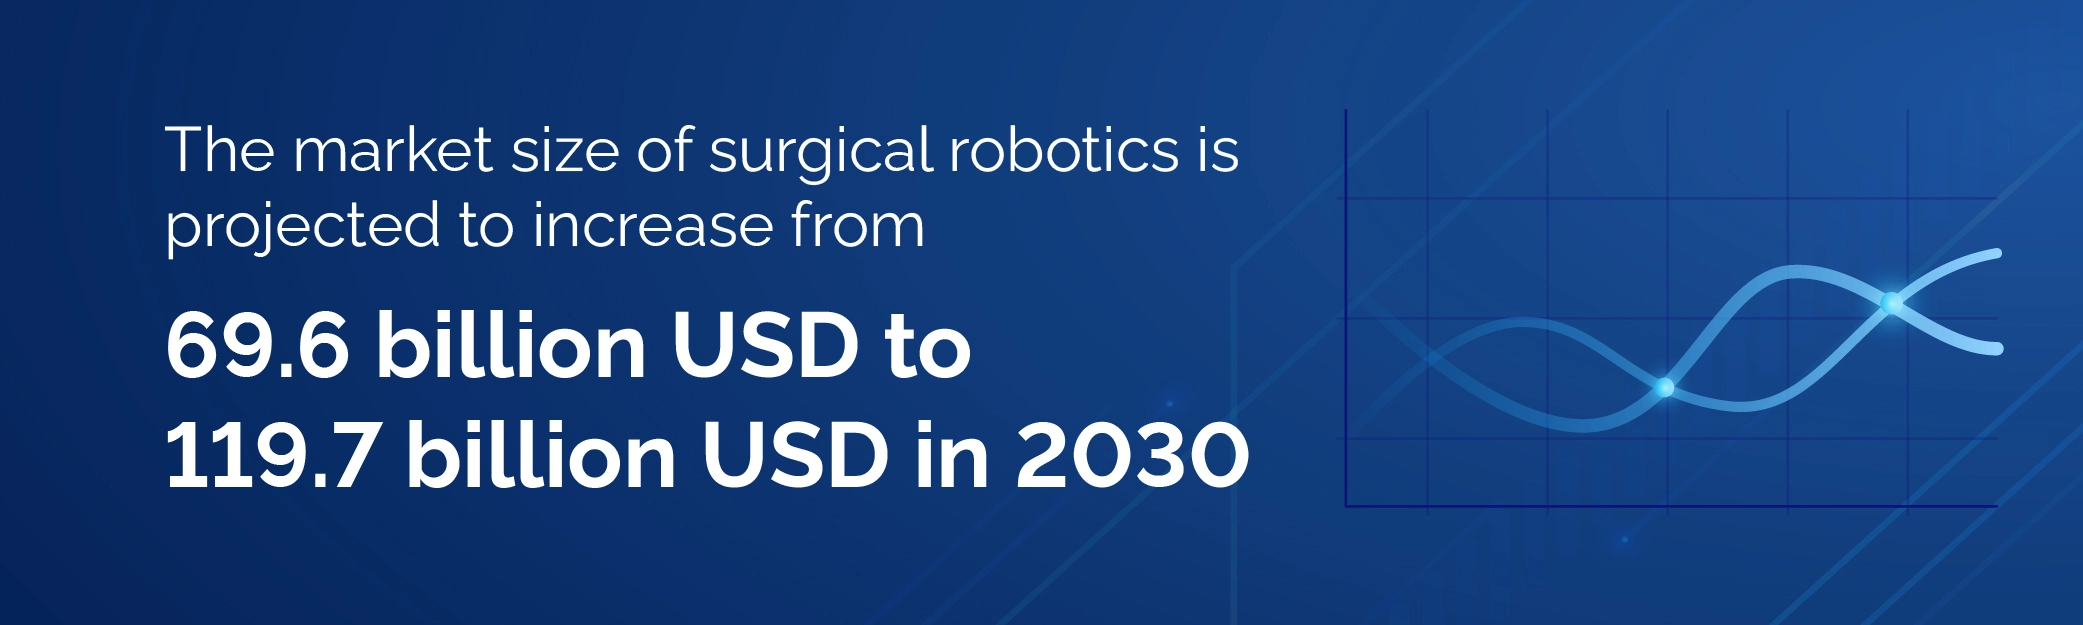 The market size of surgical robotics | Robotic Surgery: The New Age Orthopedic Solution 